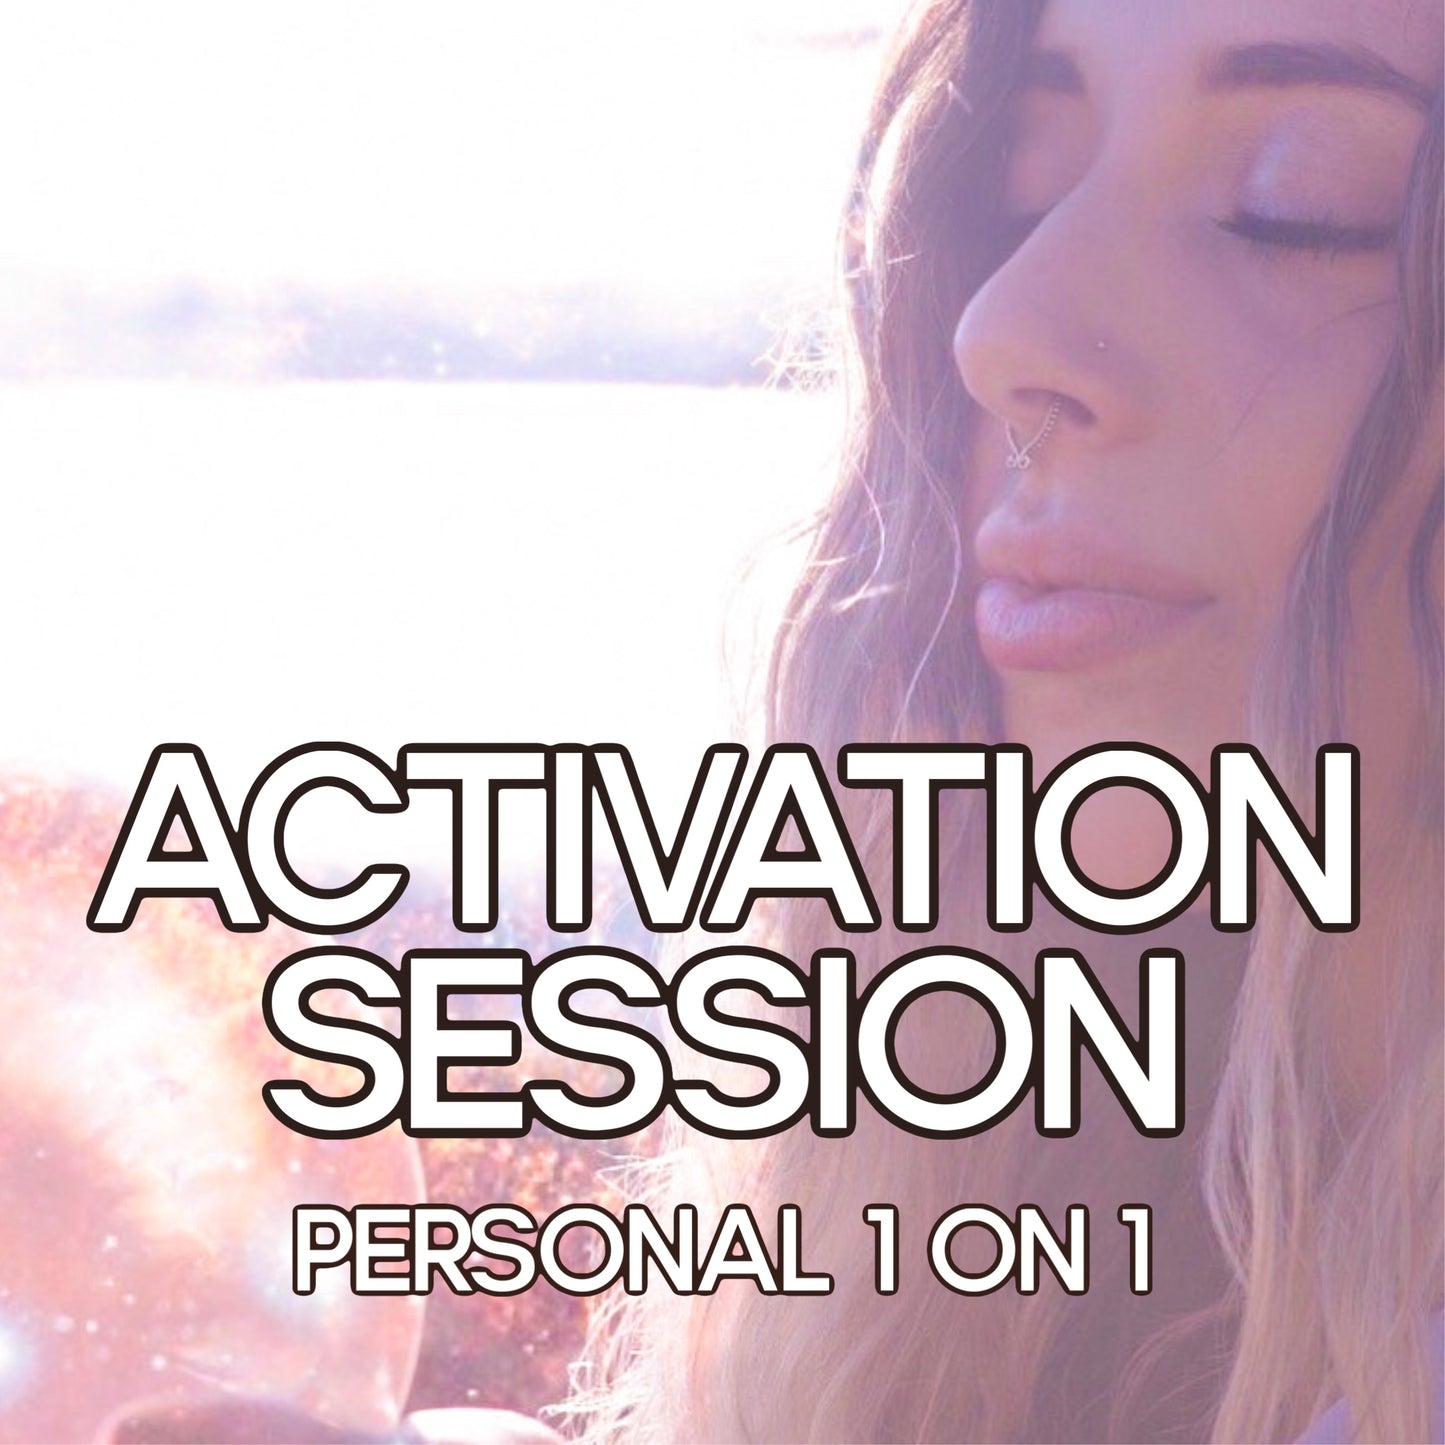 Activation Session